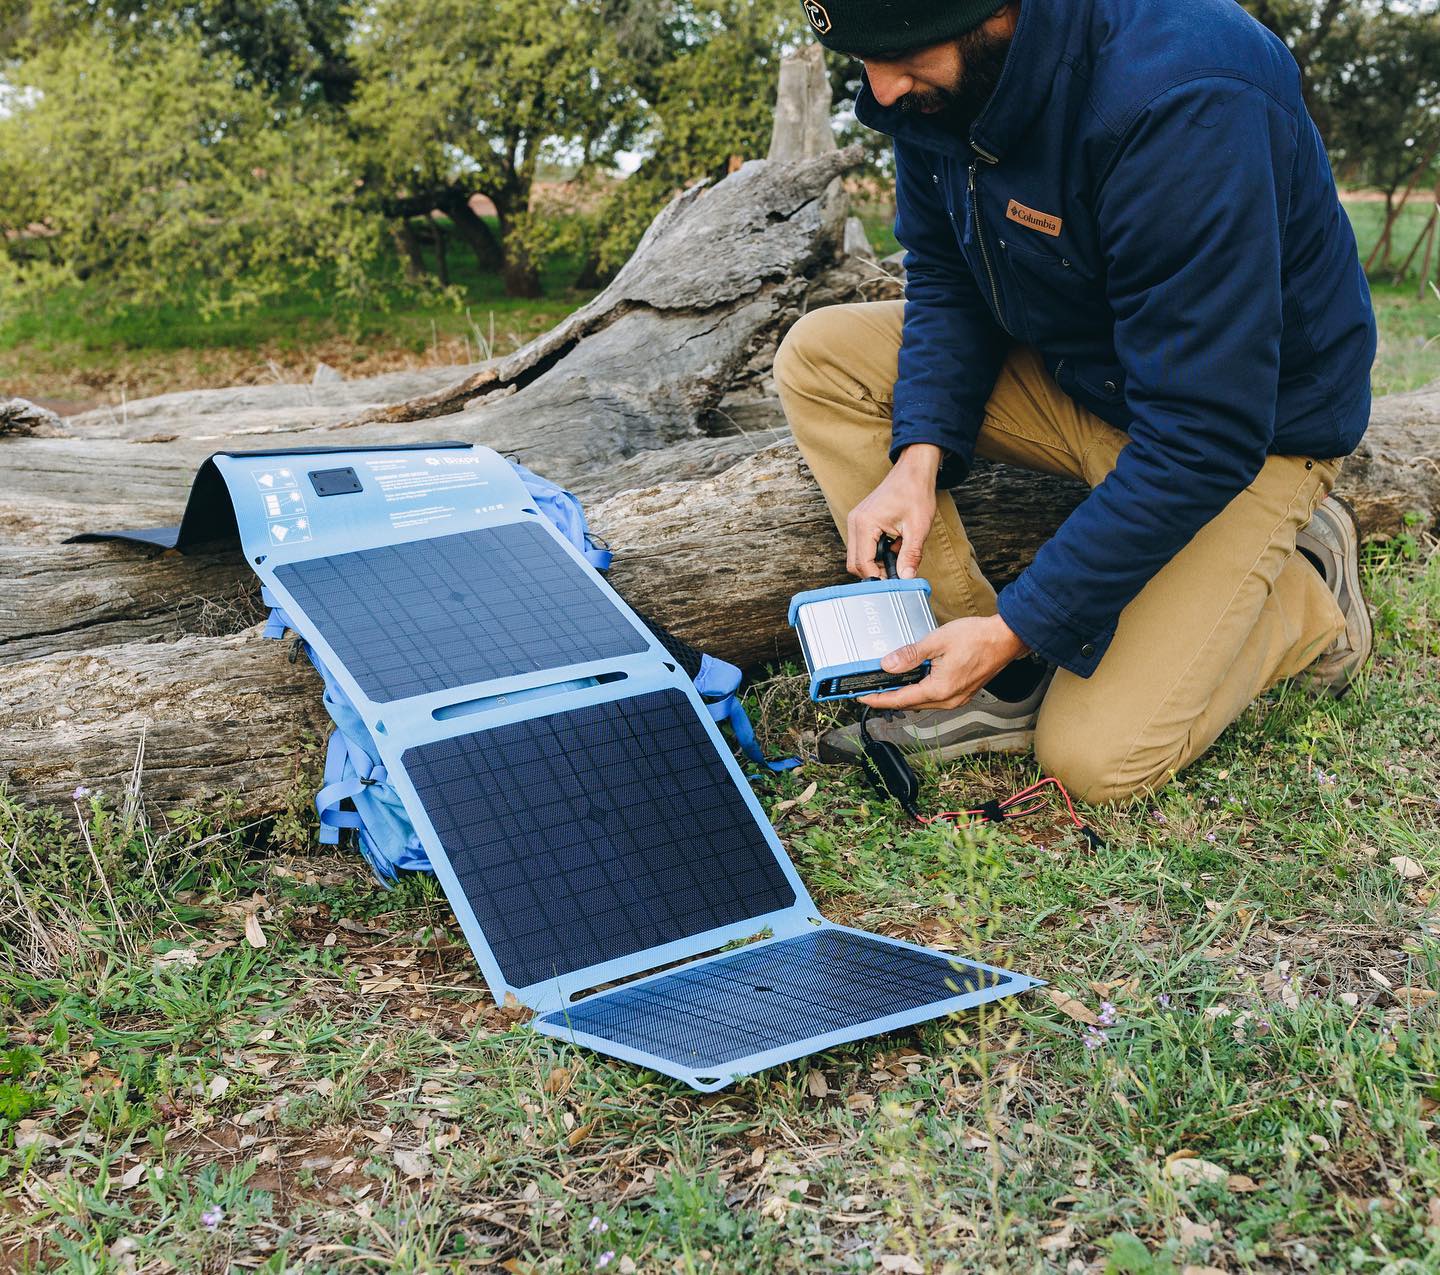 Man using solar panels to charge Bixpy Power Bank while on a camping trip